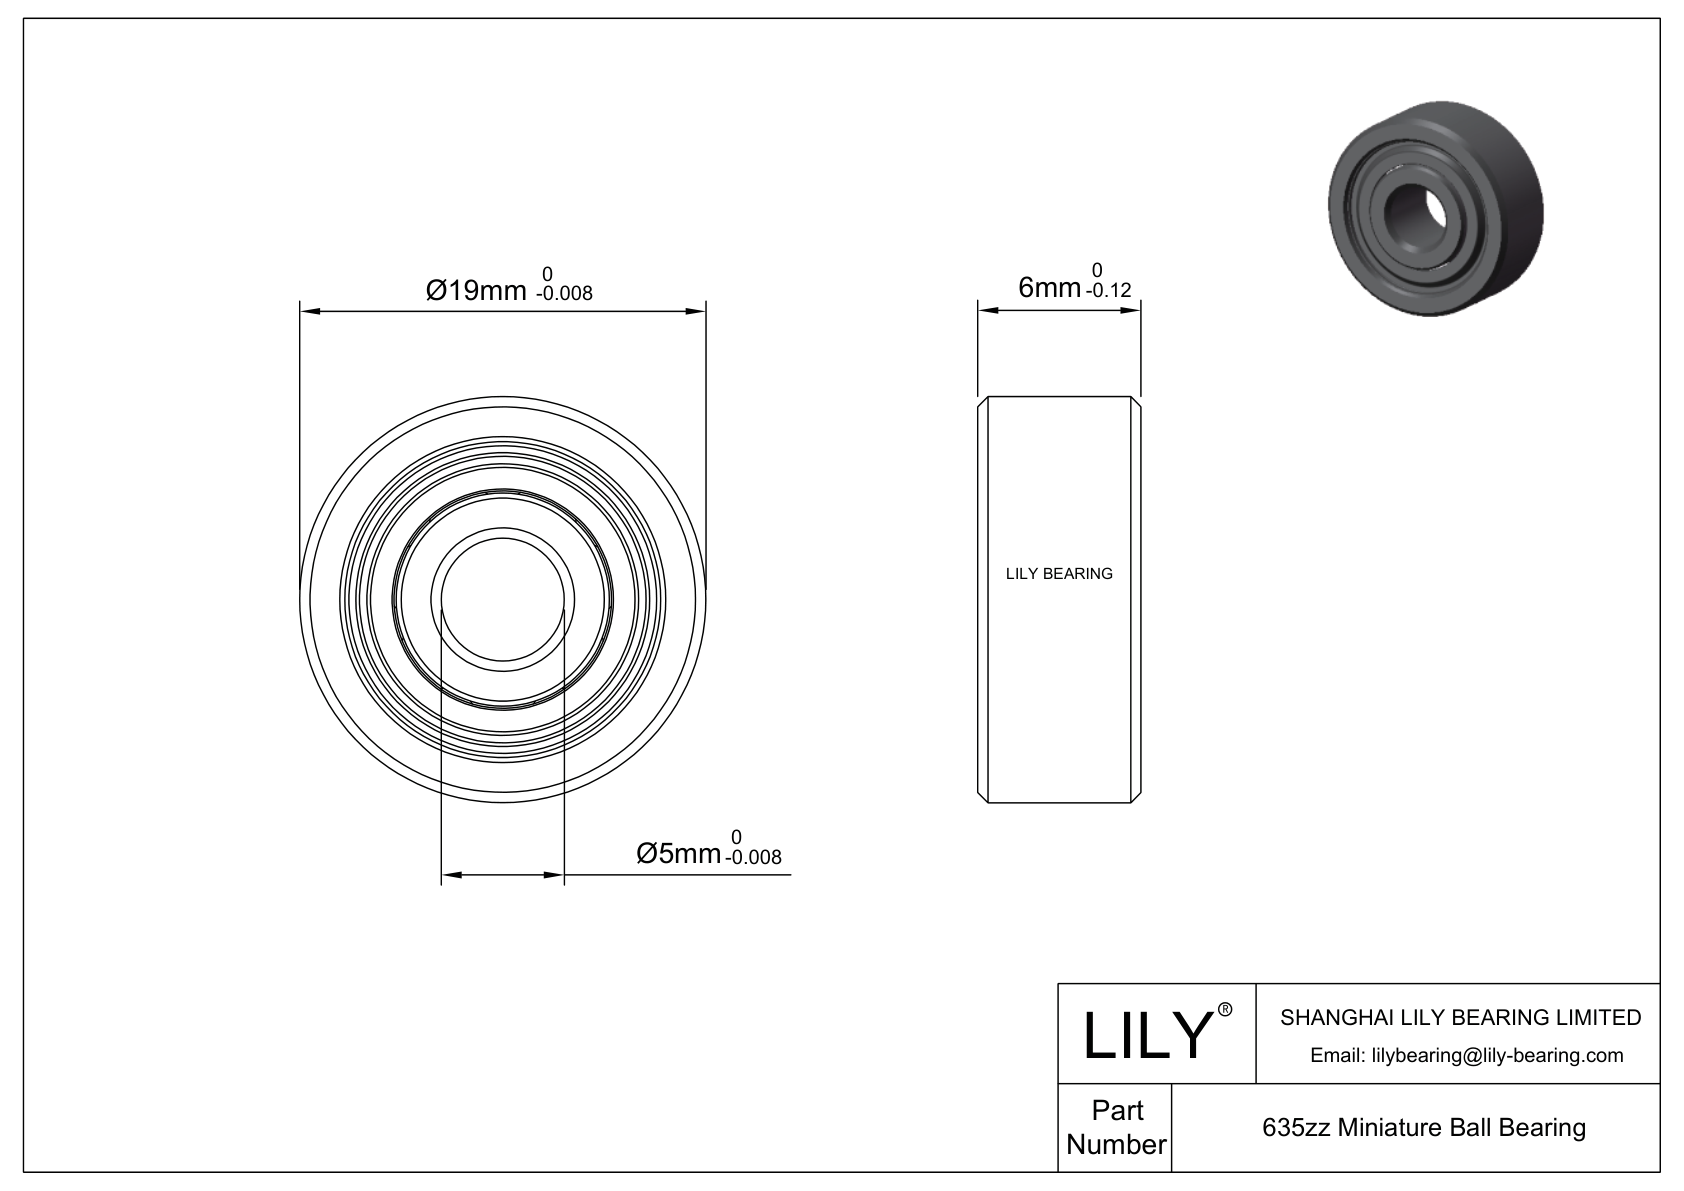 LILY-PUT63540-30 Outsourcing Polyurethane bearings cad drawing